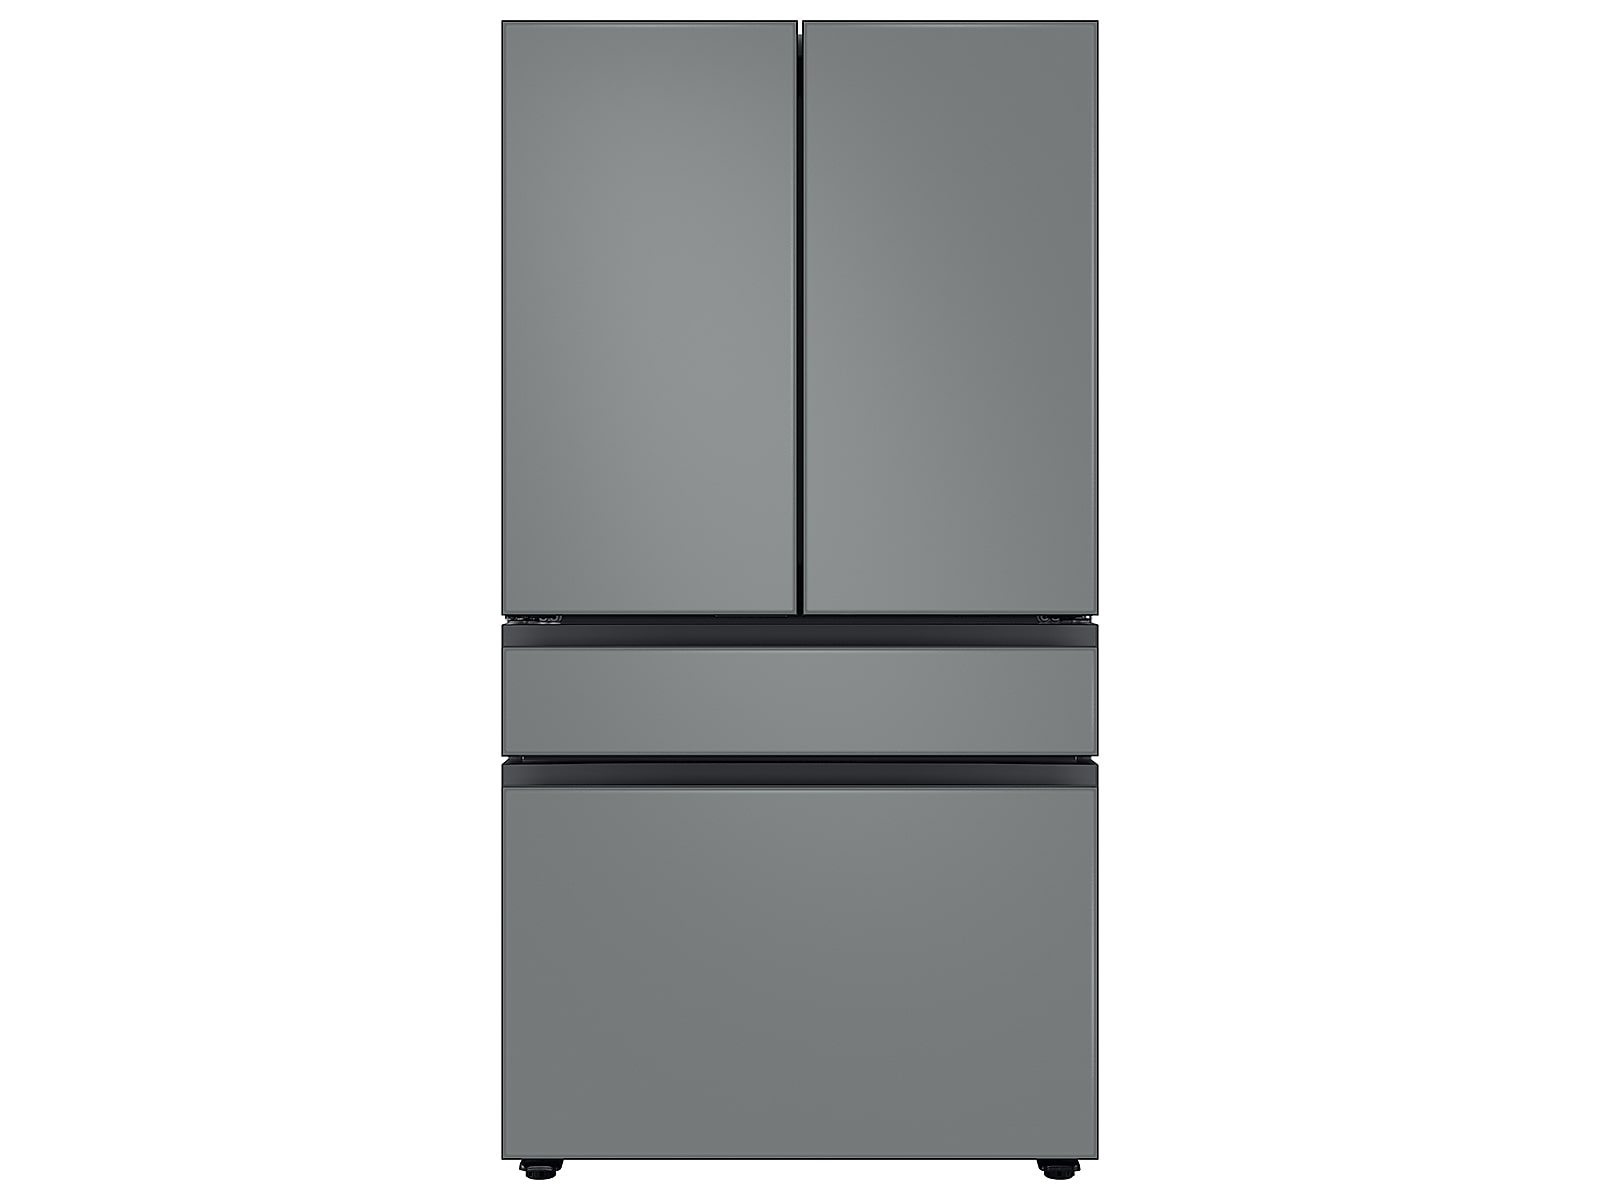 Samsung Bespoke 4-Door French Door Refrigerator in White Glass (23 cu. ft.) with AutoFill Water Pitcher and Customizable Door Panel Colors in Grey Glass